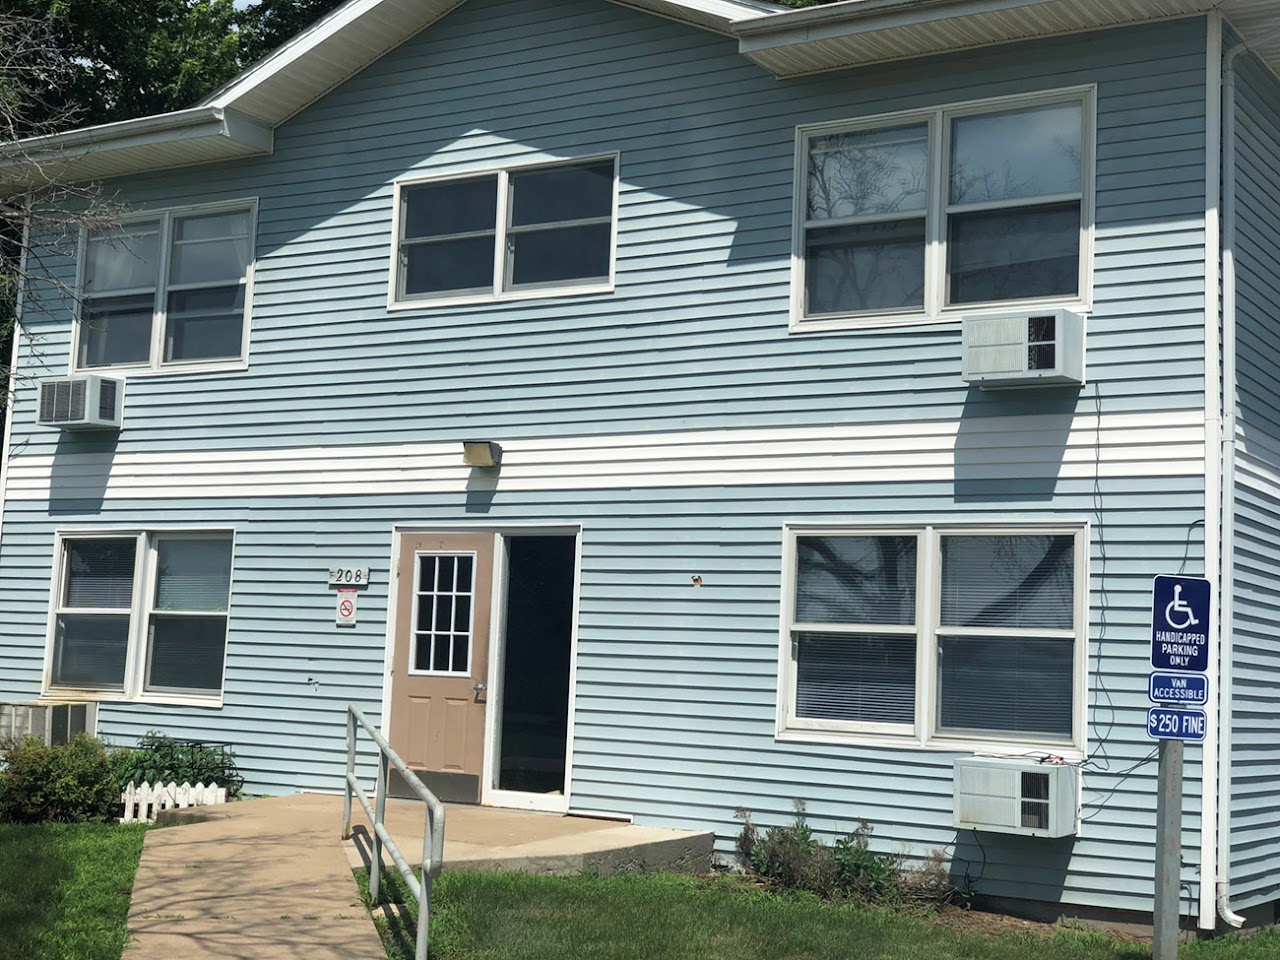 Photo of BARDOLPH APTS. Affordable housing located at 206 W SPRUCE ST BARDOLPH, IL 61416